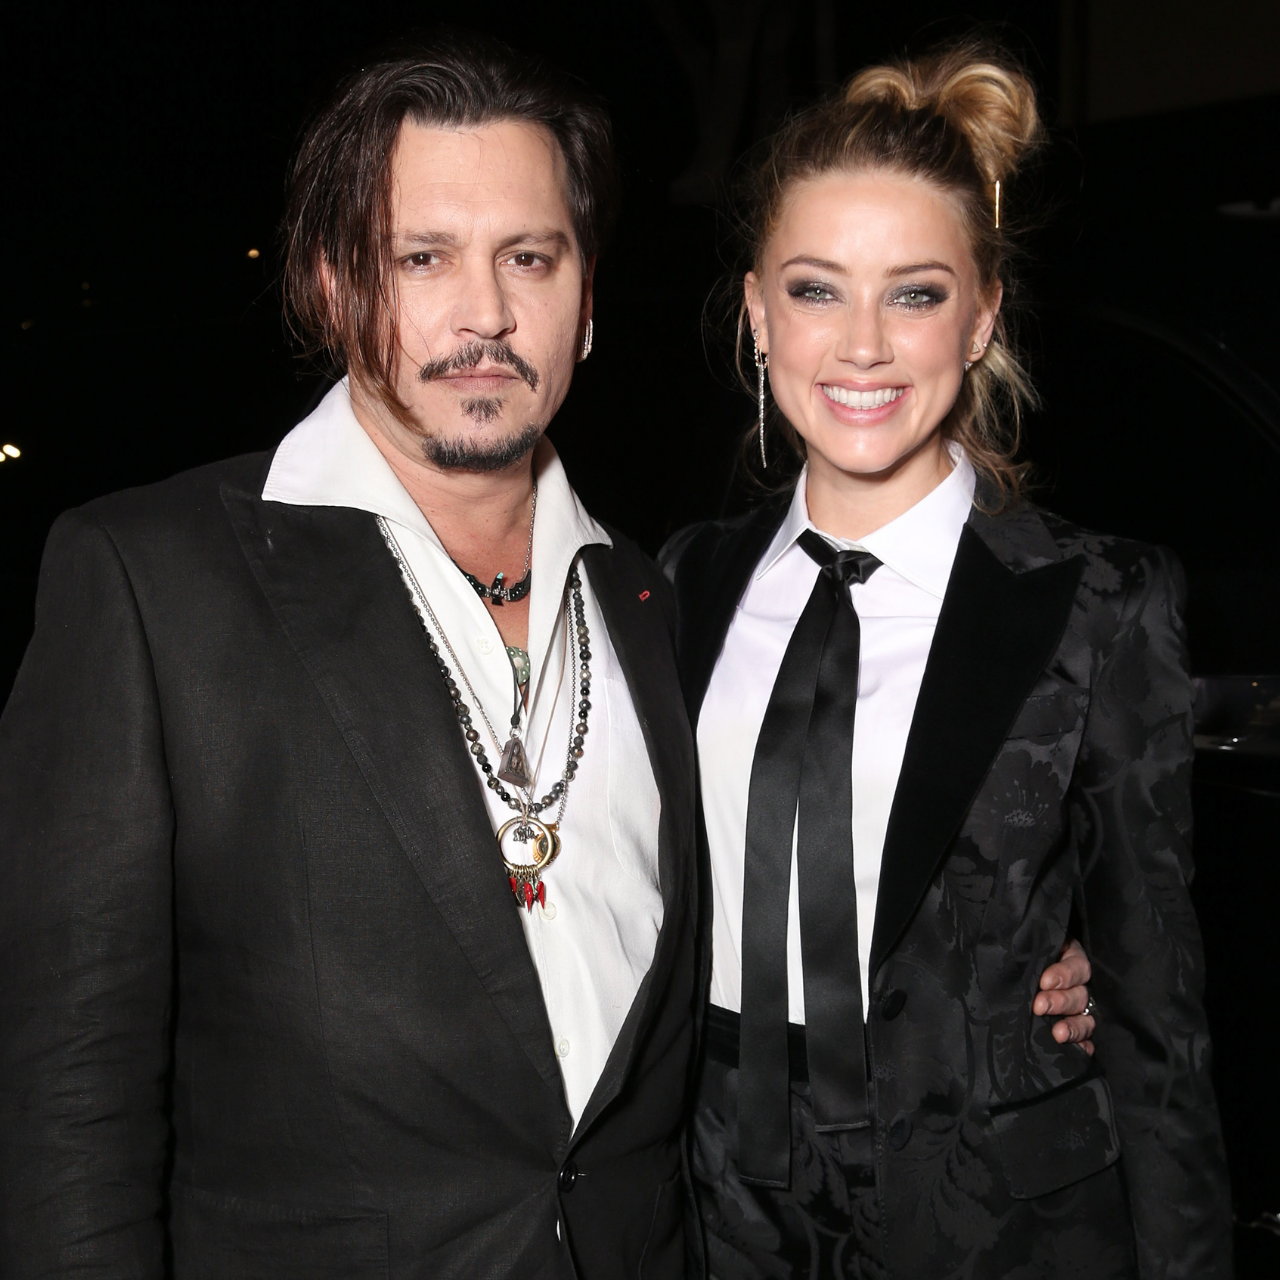 Johnny Depp and Amber Heard attend the premiere of The Danish Girl 2015